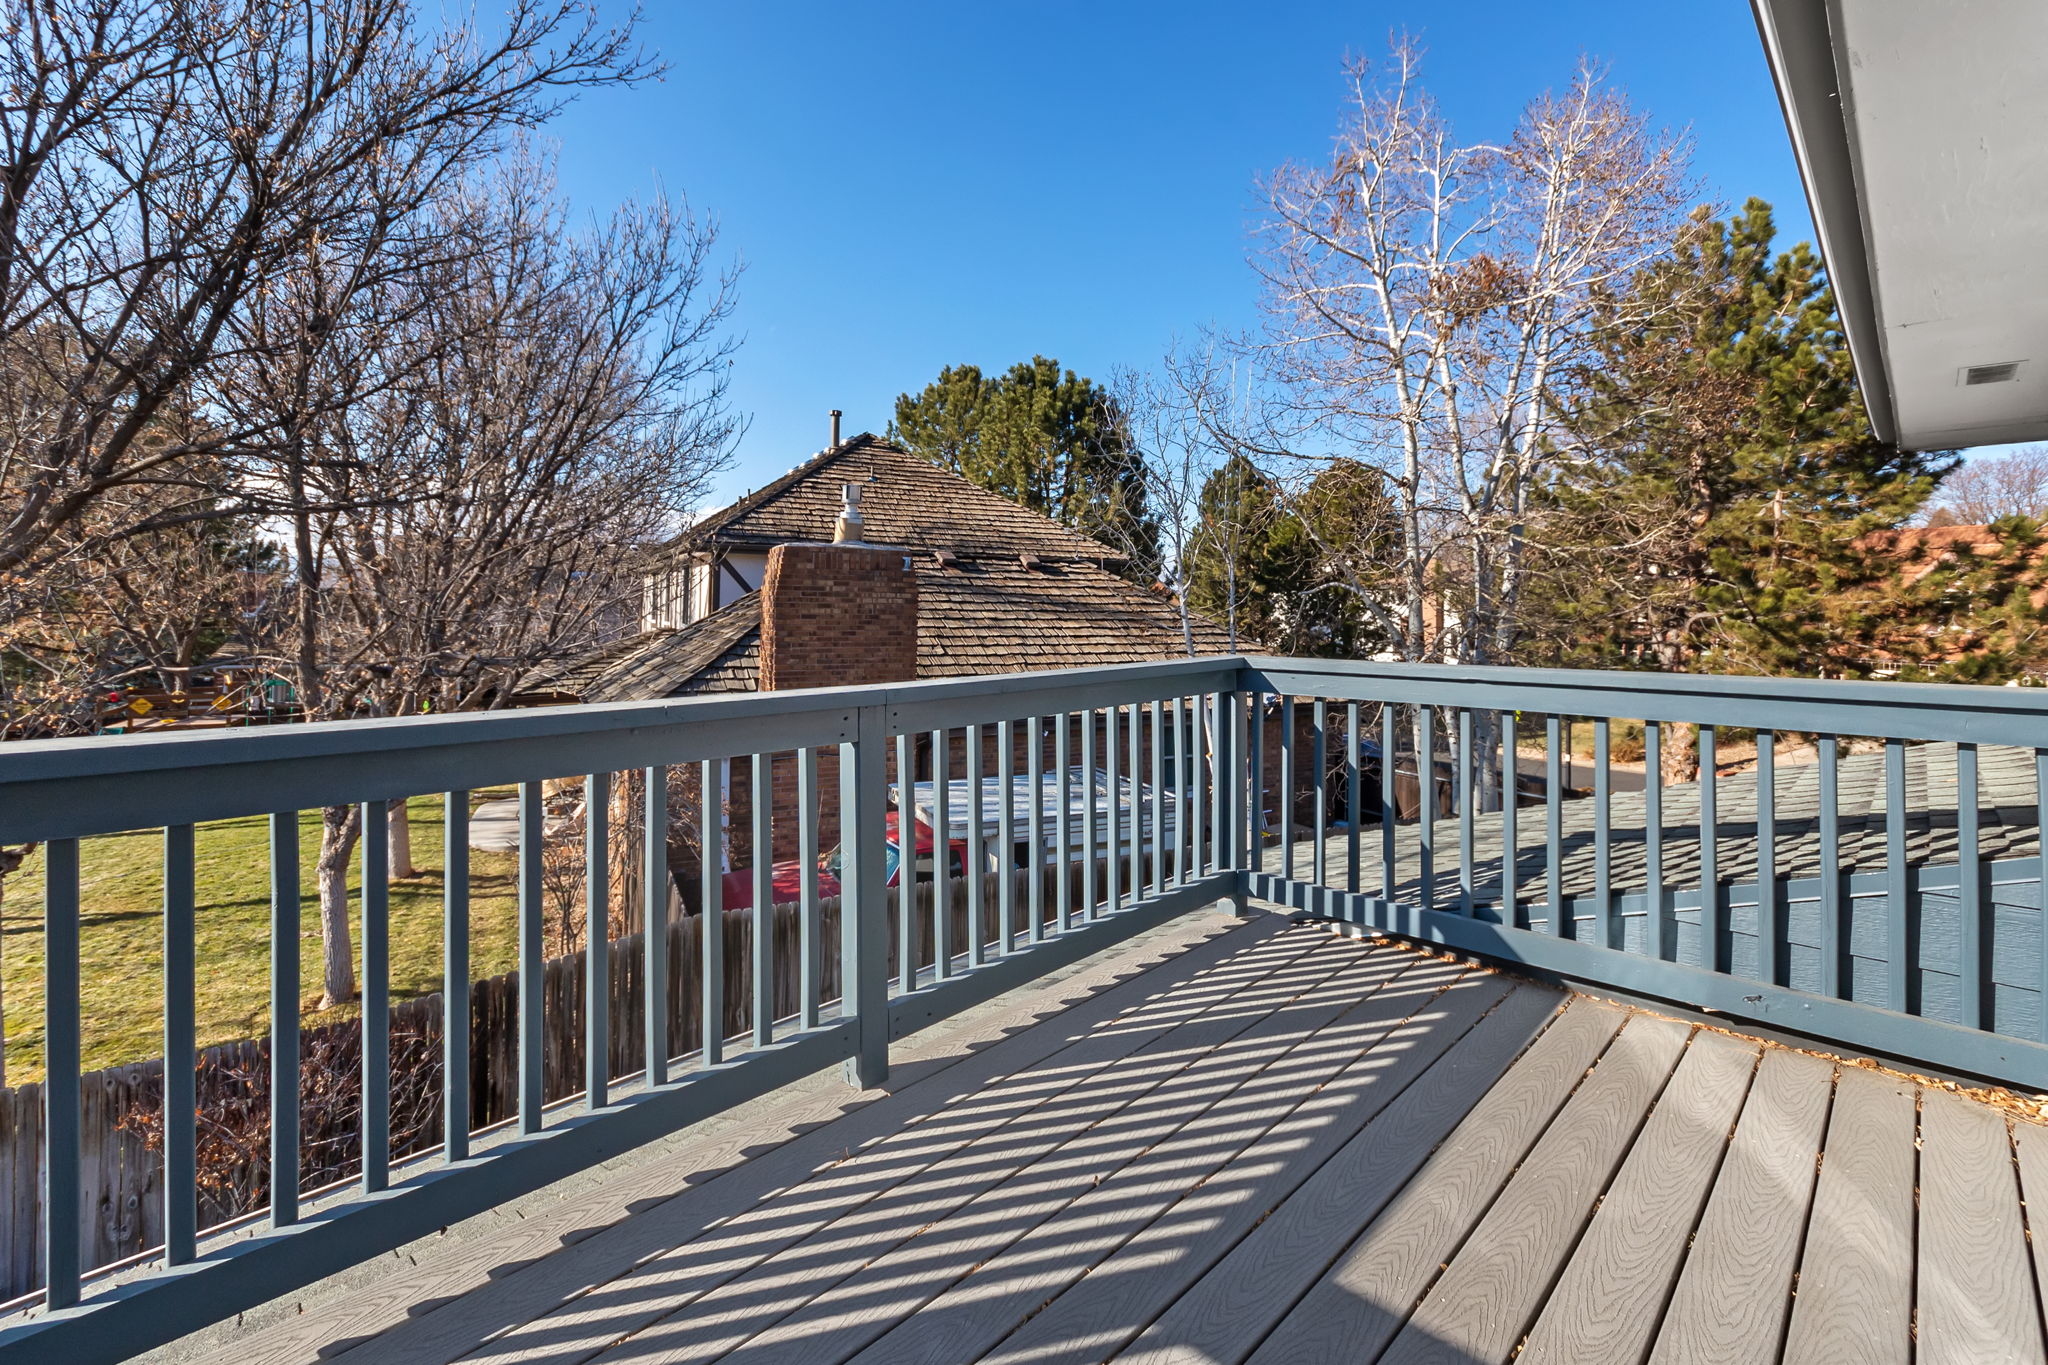  1678 W 115th Cir, Westminster, CO 80234, US Photo 27